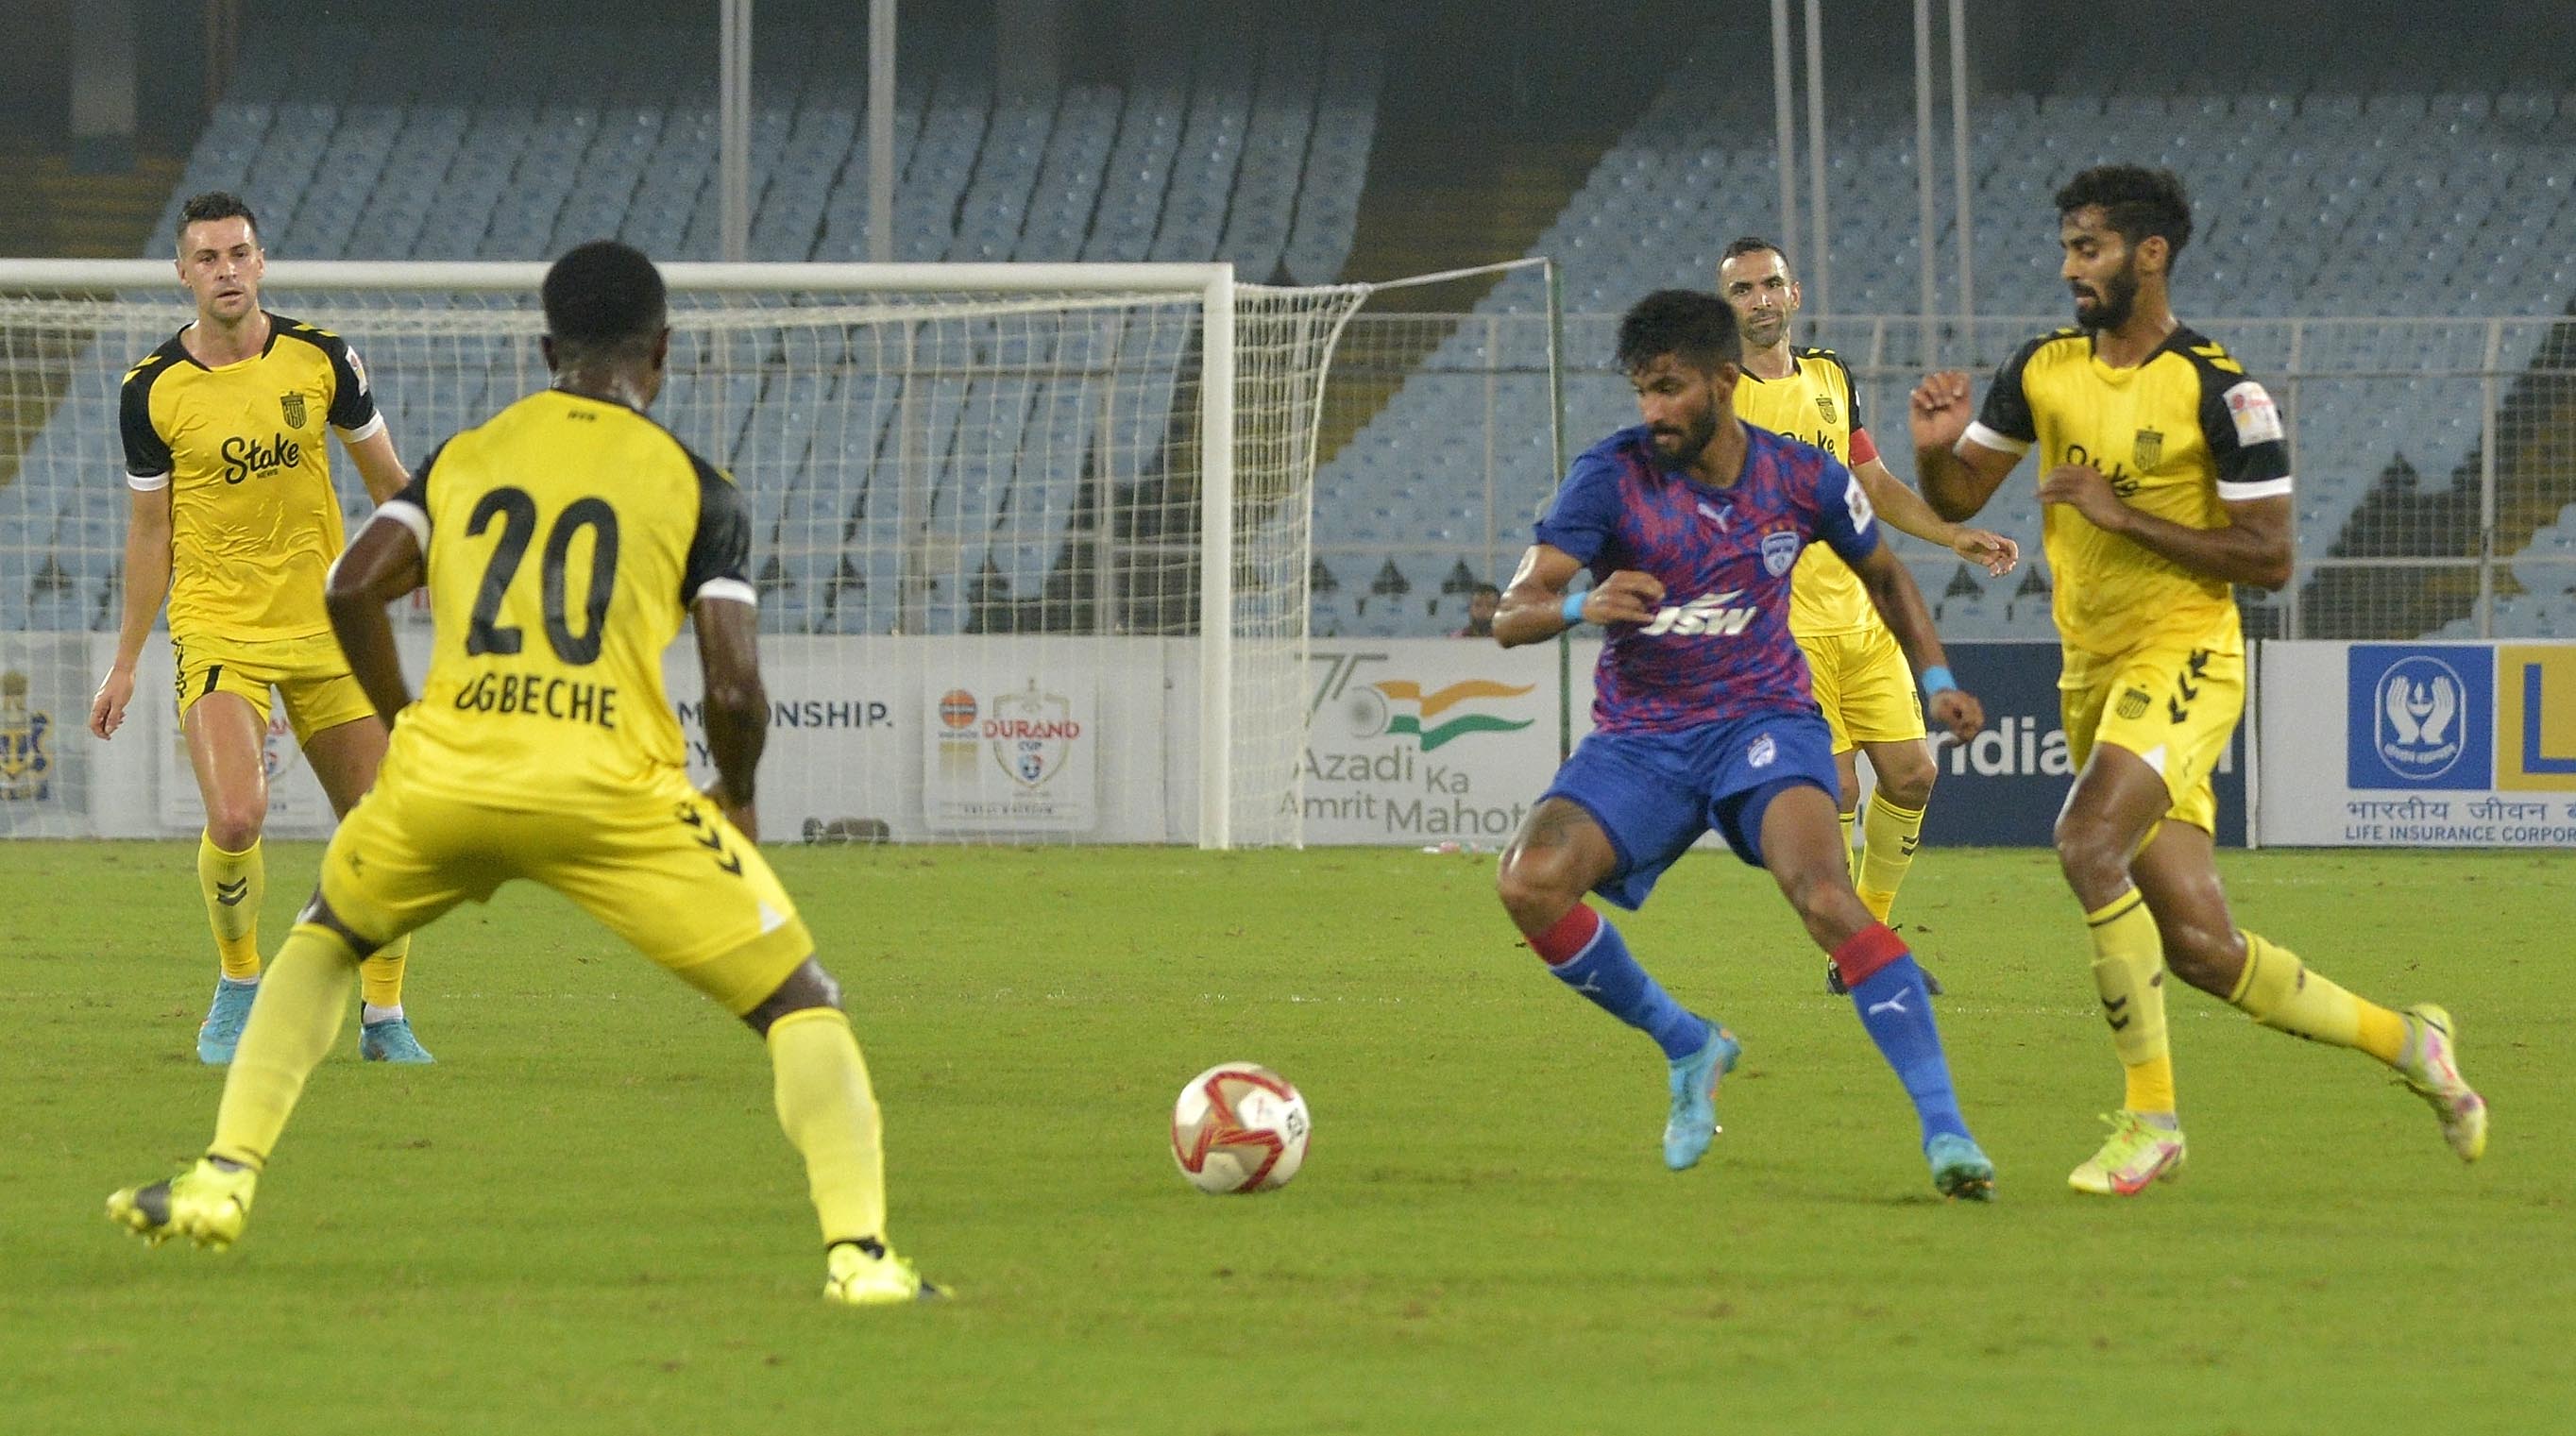 Durand Cup Finals LIVE Streaming, Mumbai City FC vs Bengaluru FC LIVE, Durand Cup 2022 Finals MCFC vs BFC LIVE streaming, Durand Cup Final LIVE Broadcast 